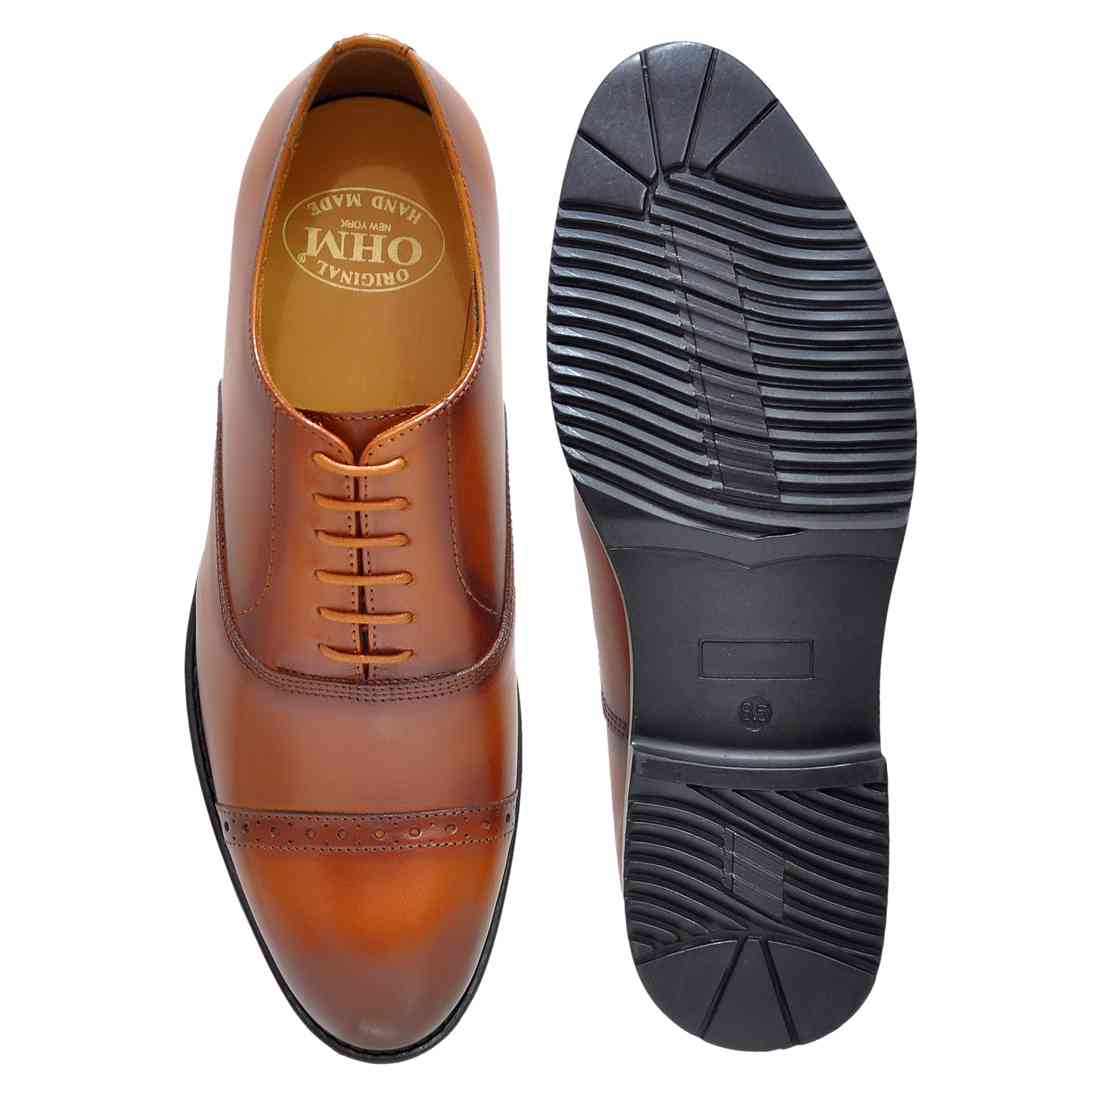 OHM New York Cap Toe Oxford Leather Shoes